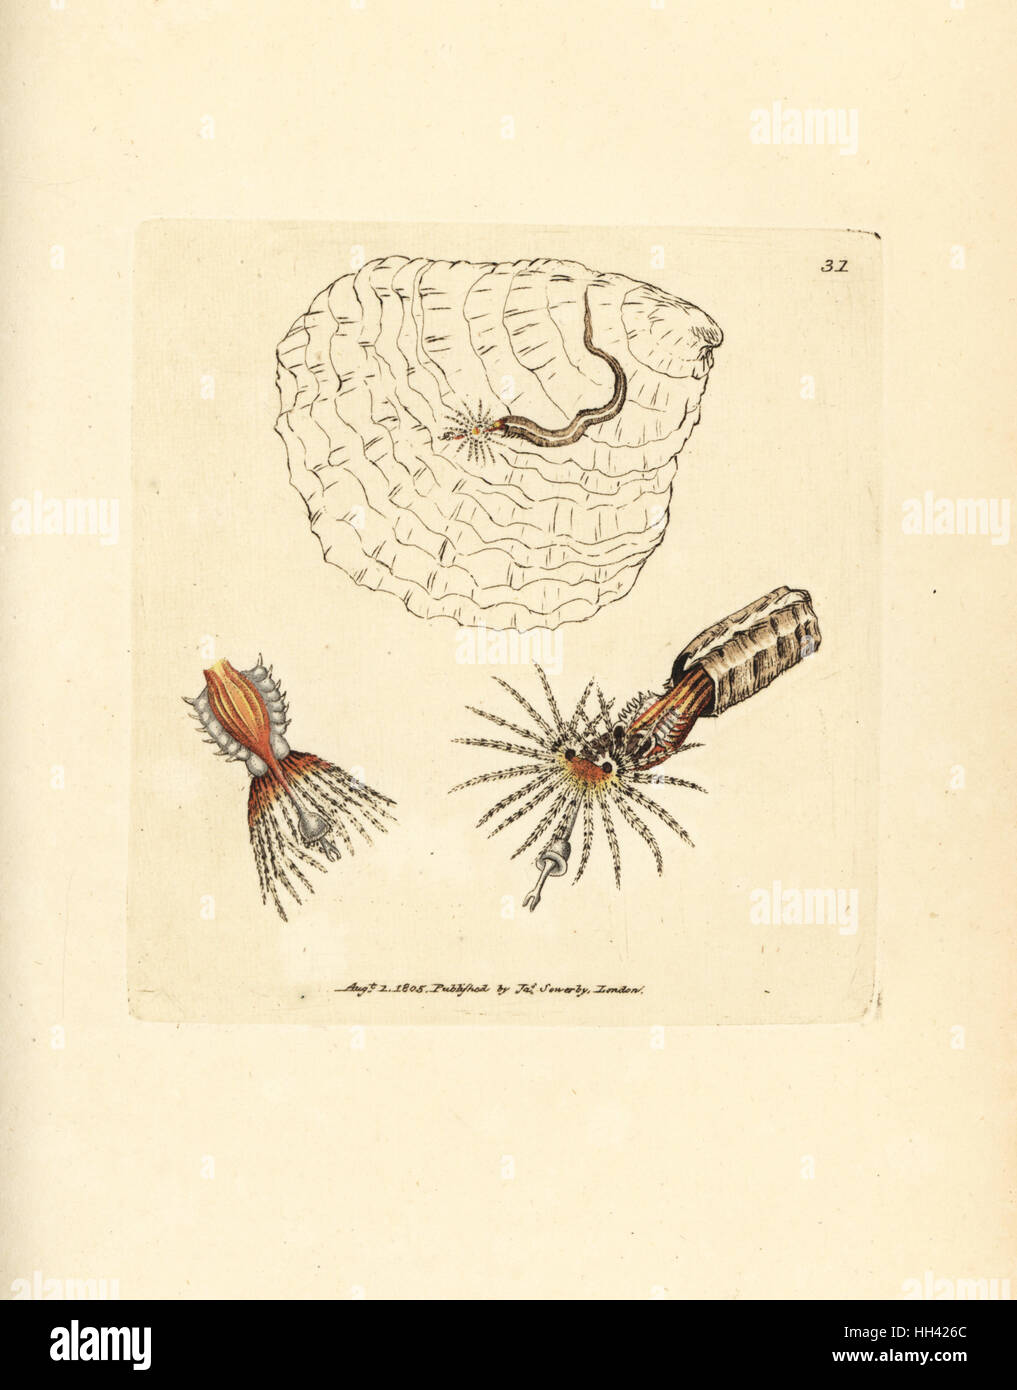 Tube-building annelid fanworm, Spirobranchus triqueter. Handcoloured copperplate engraving by James Sowerby from The British Miscellany, or Coloured figures of new, rare, or little known animal subjects, London, 1804. Stock Photo